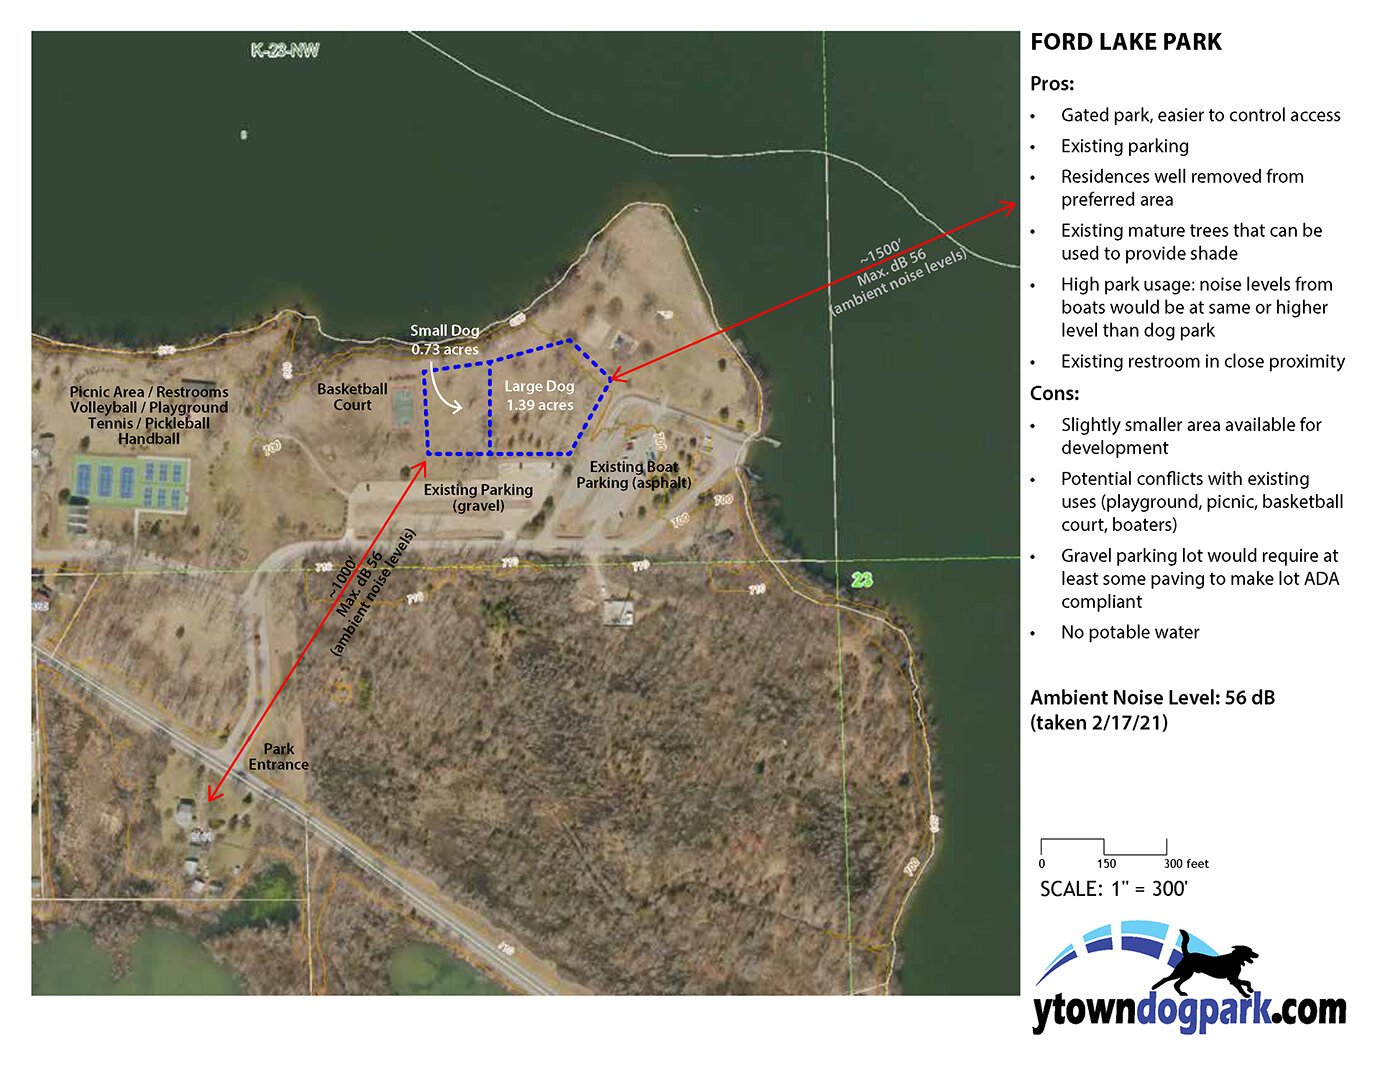 A map of the proposed dog park at Ford Lake Park.